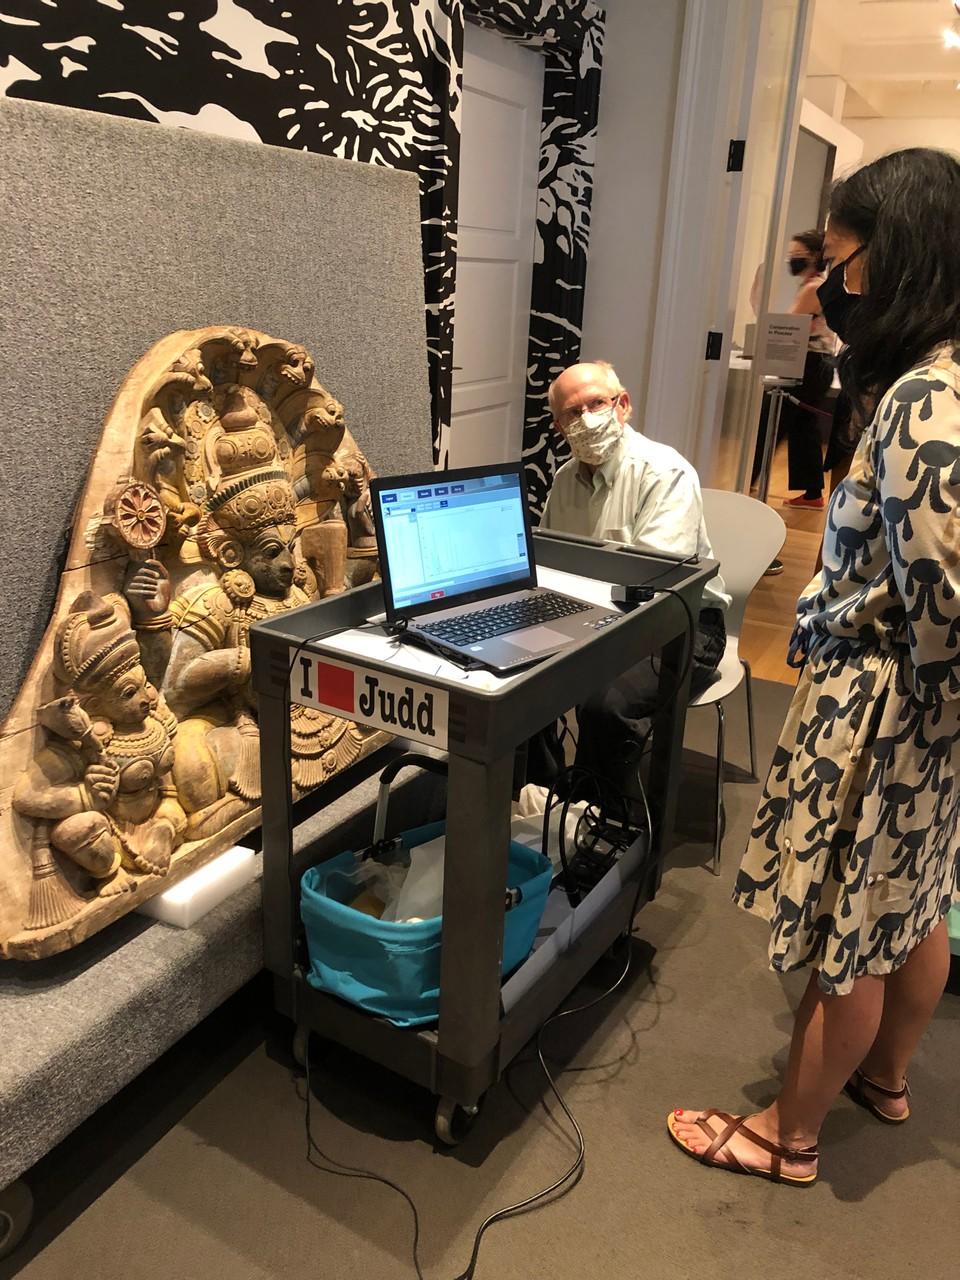 A masked person sits beside a carved stone artwork and a computer on a cart. They interact with a standing person, also masked.